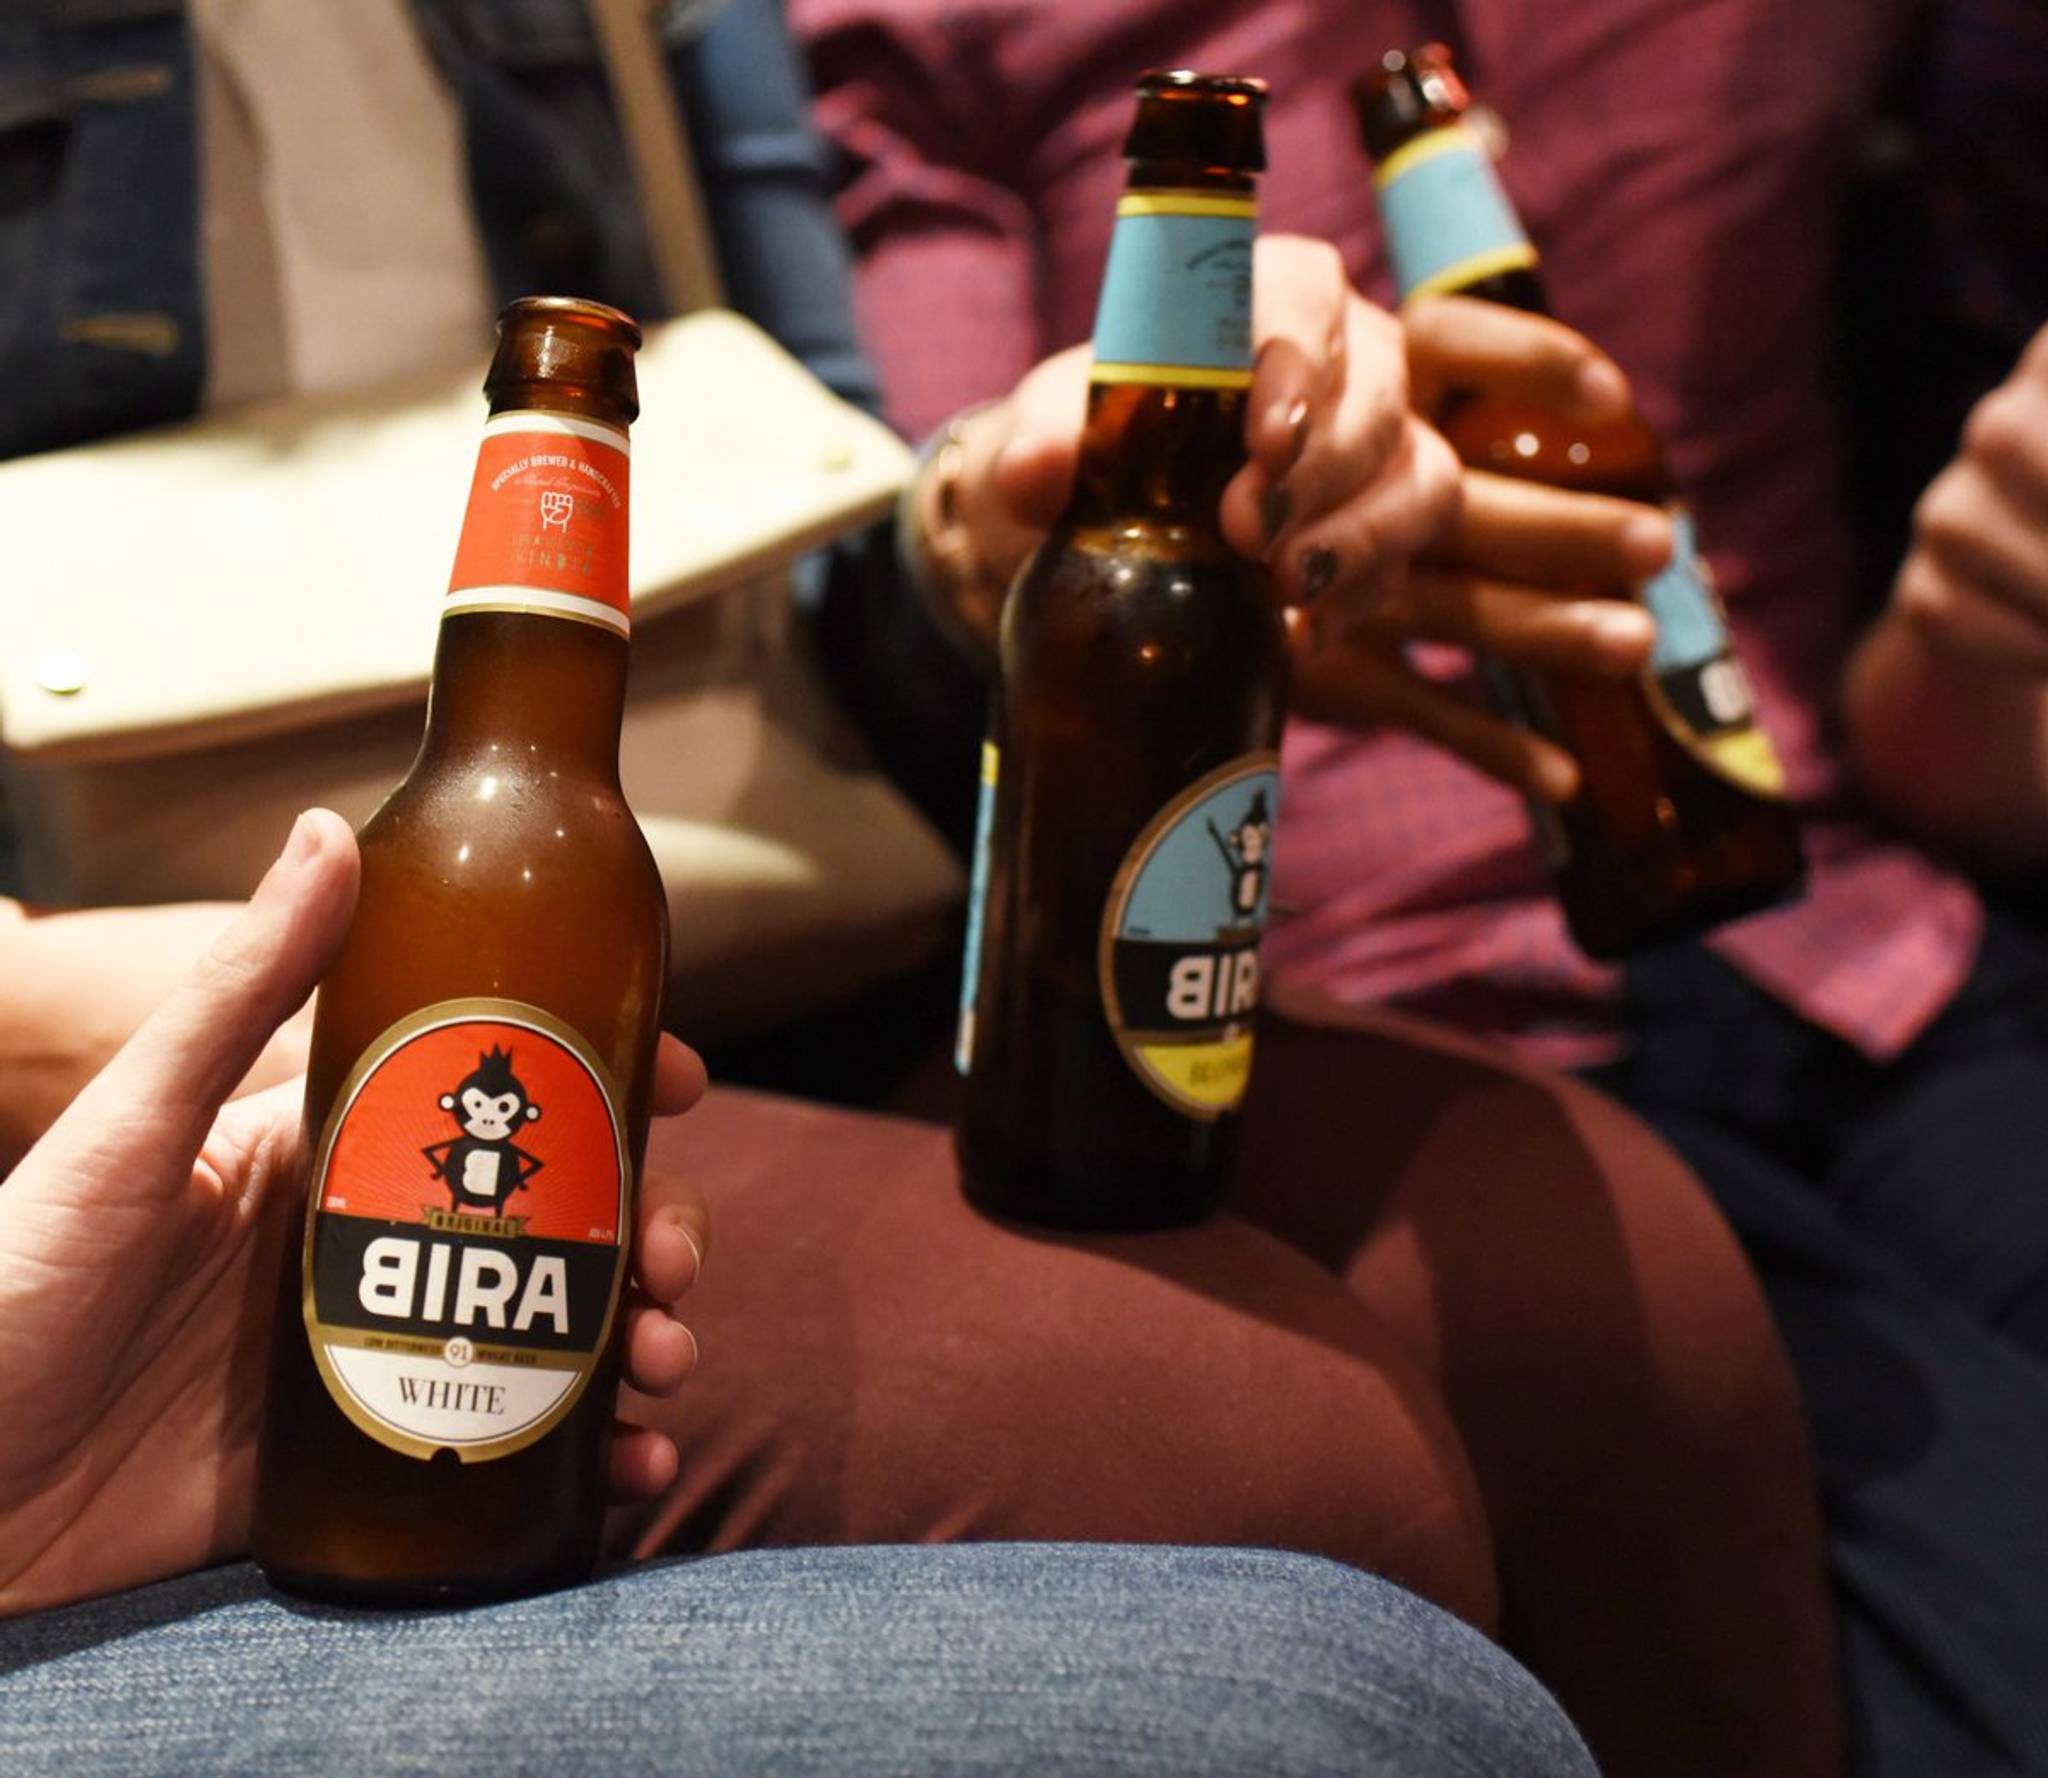 Bira 91 Light is a beer for health-conscious Indians